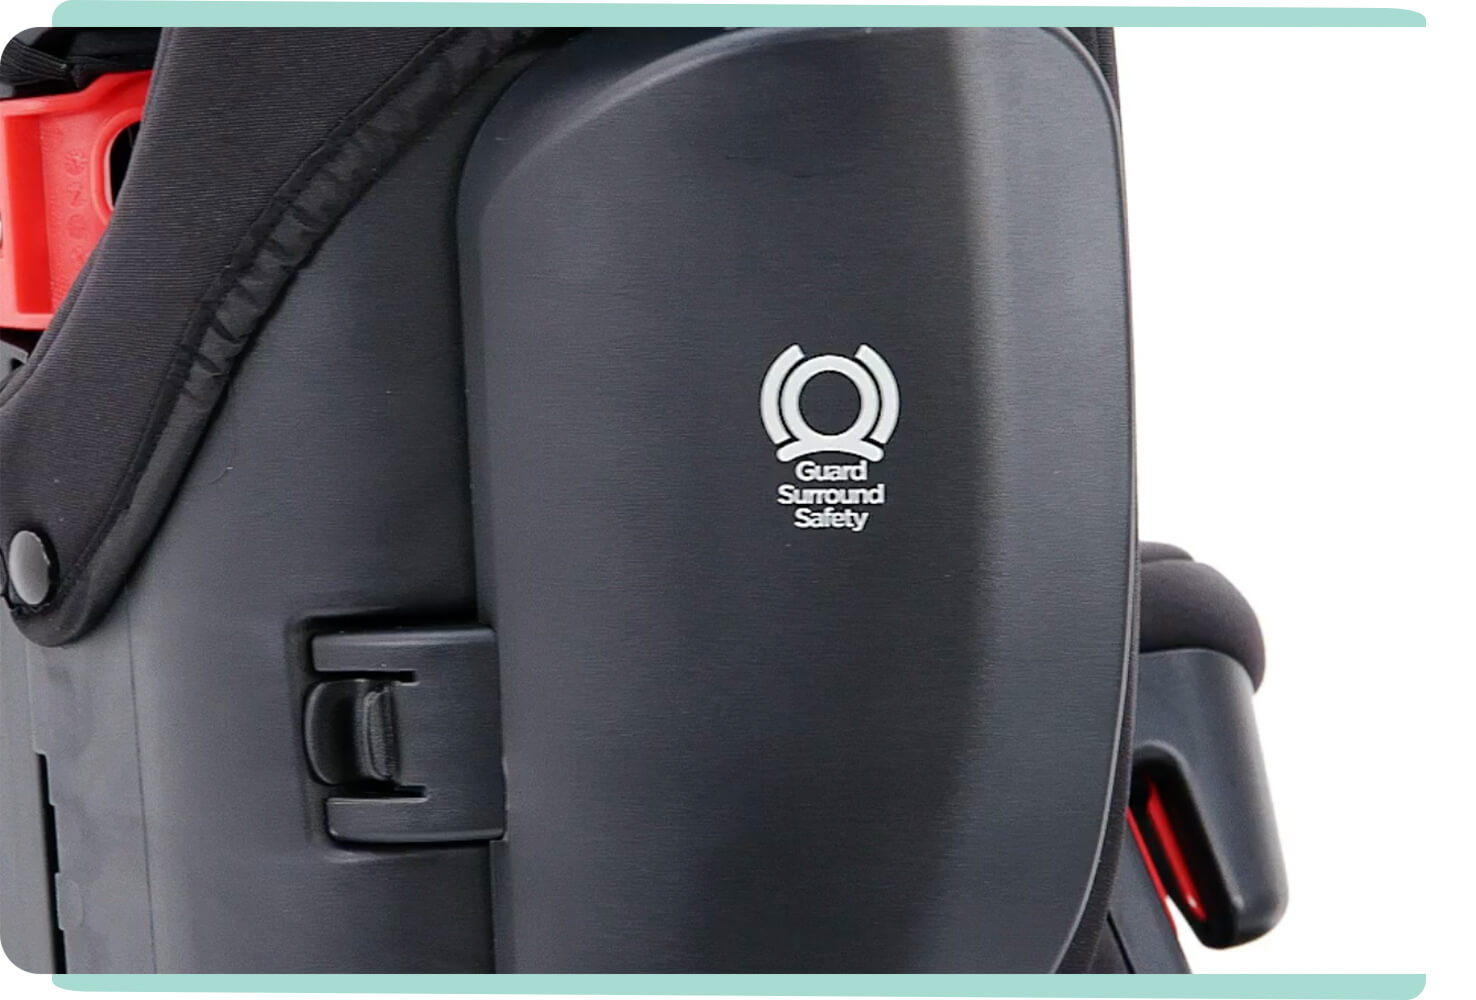  Zoomed in view of side impact protection on Joie trillo shield booster car seat.